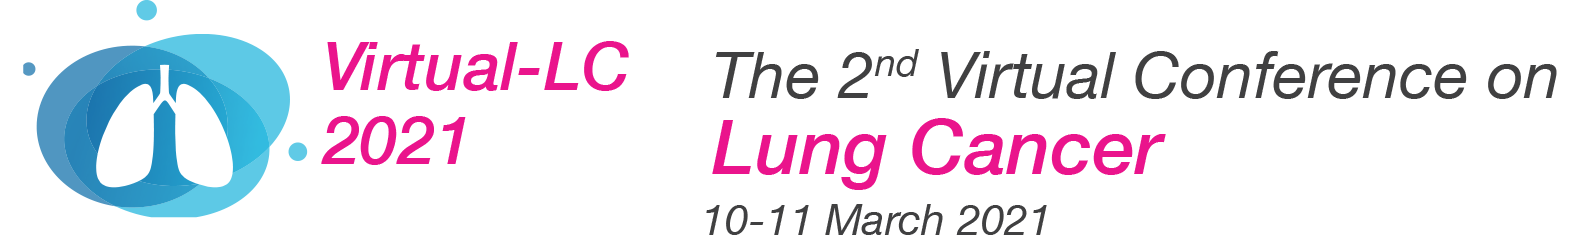  The 2nd Virtual Conference on Lung Cancer